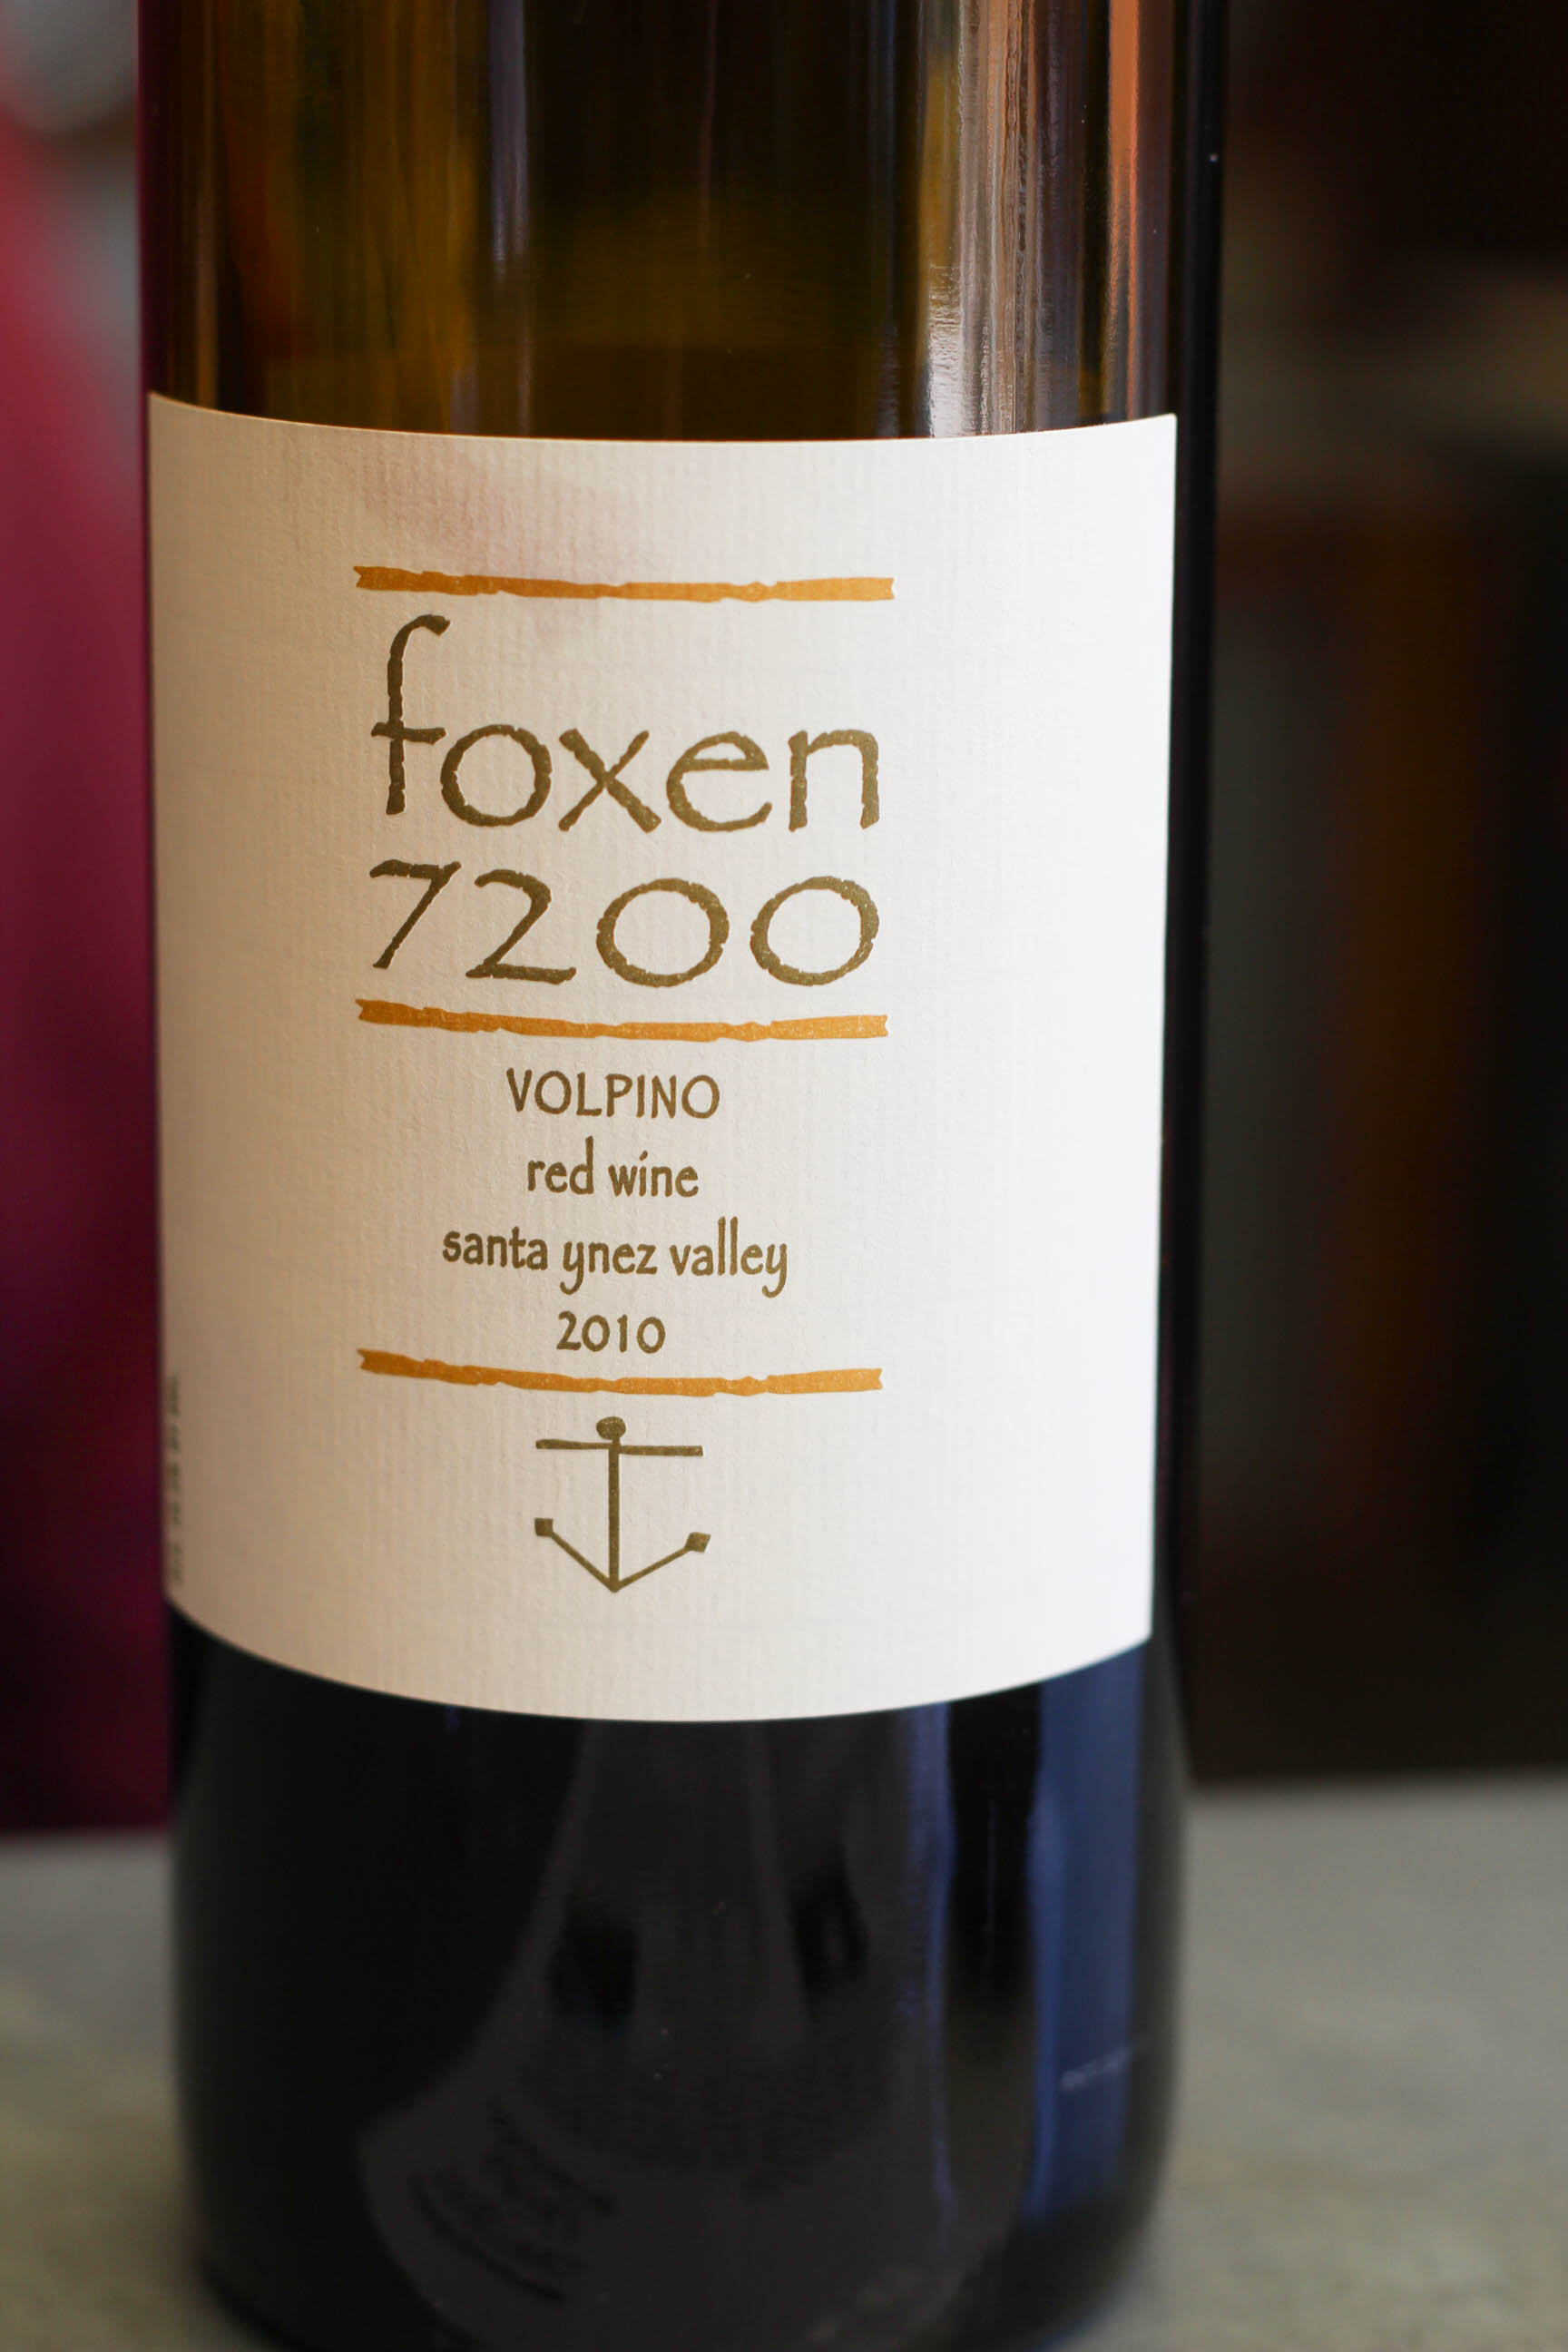 2010 Volpino at Foxen Winery and Vineyards